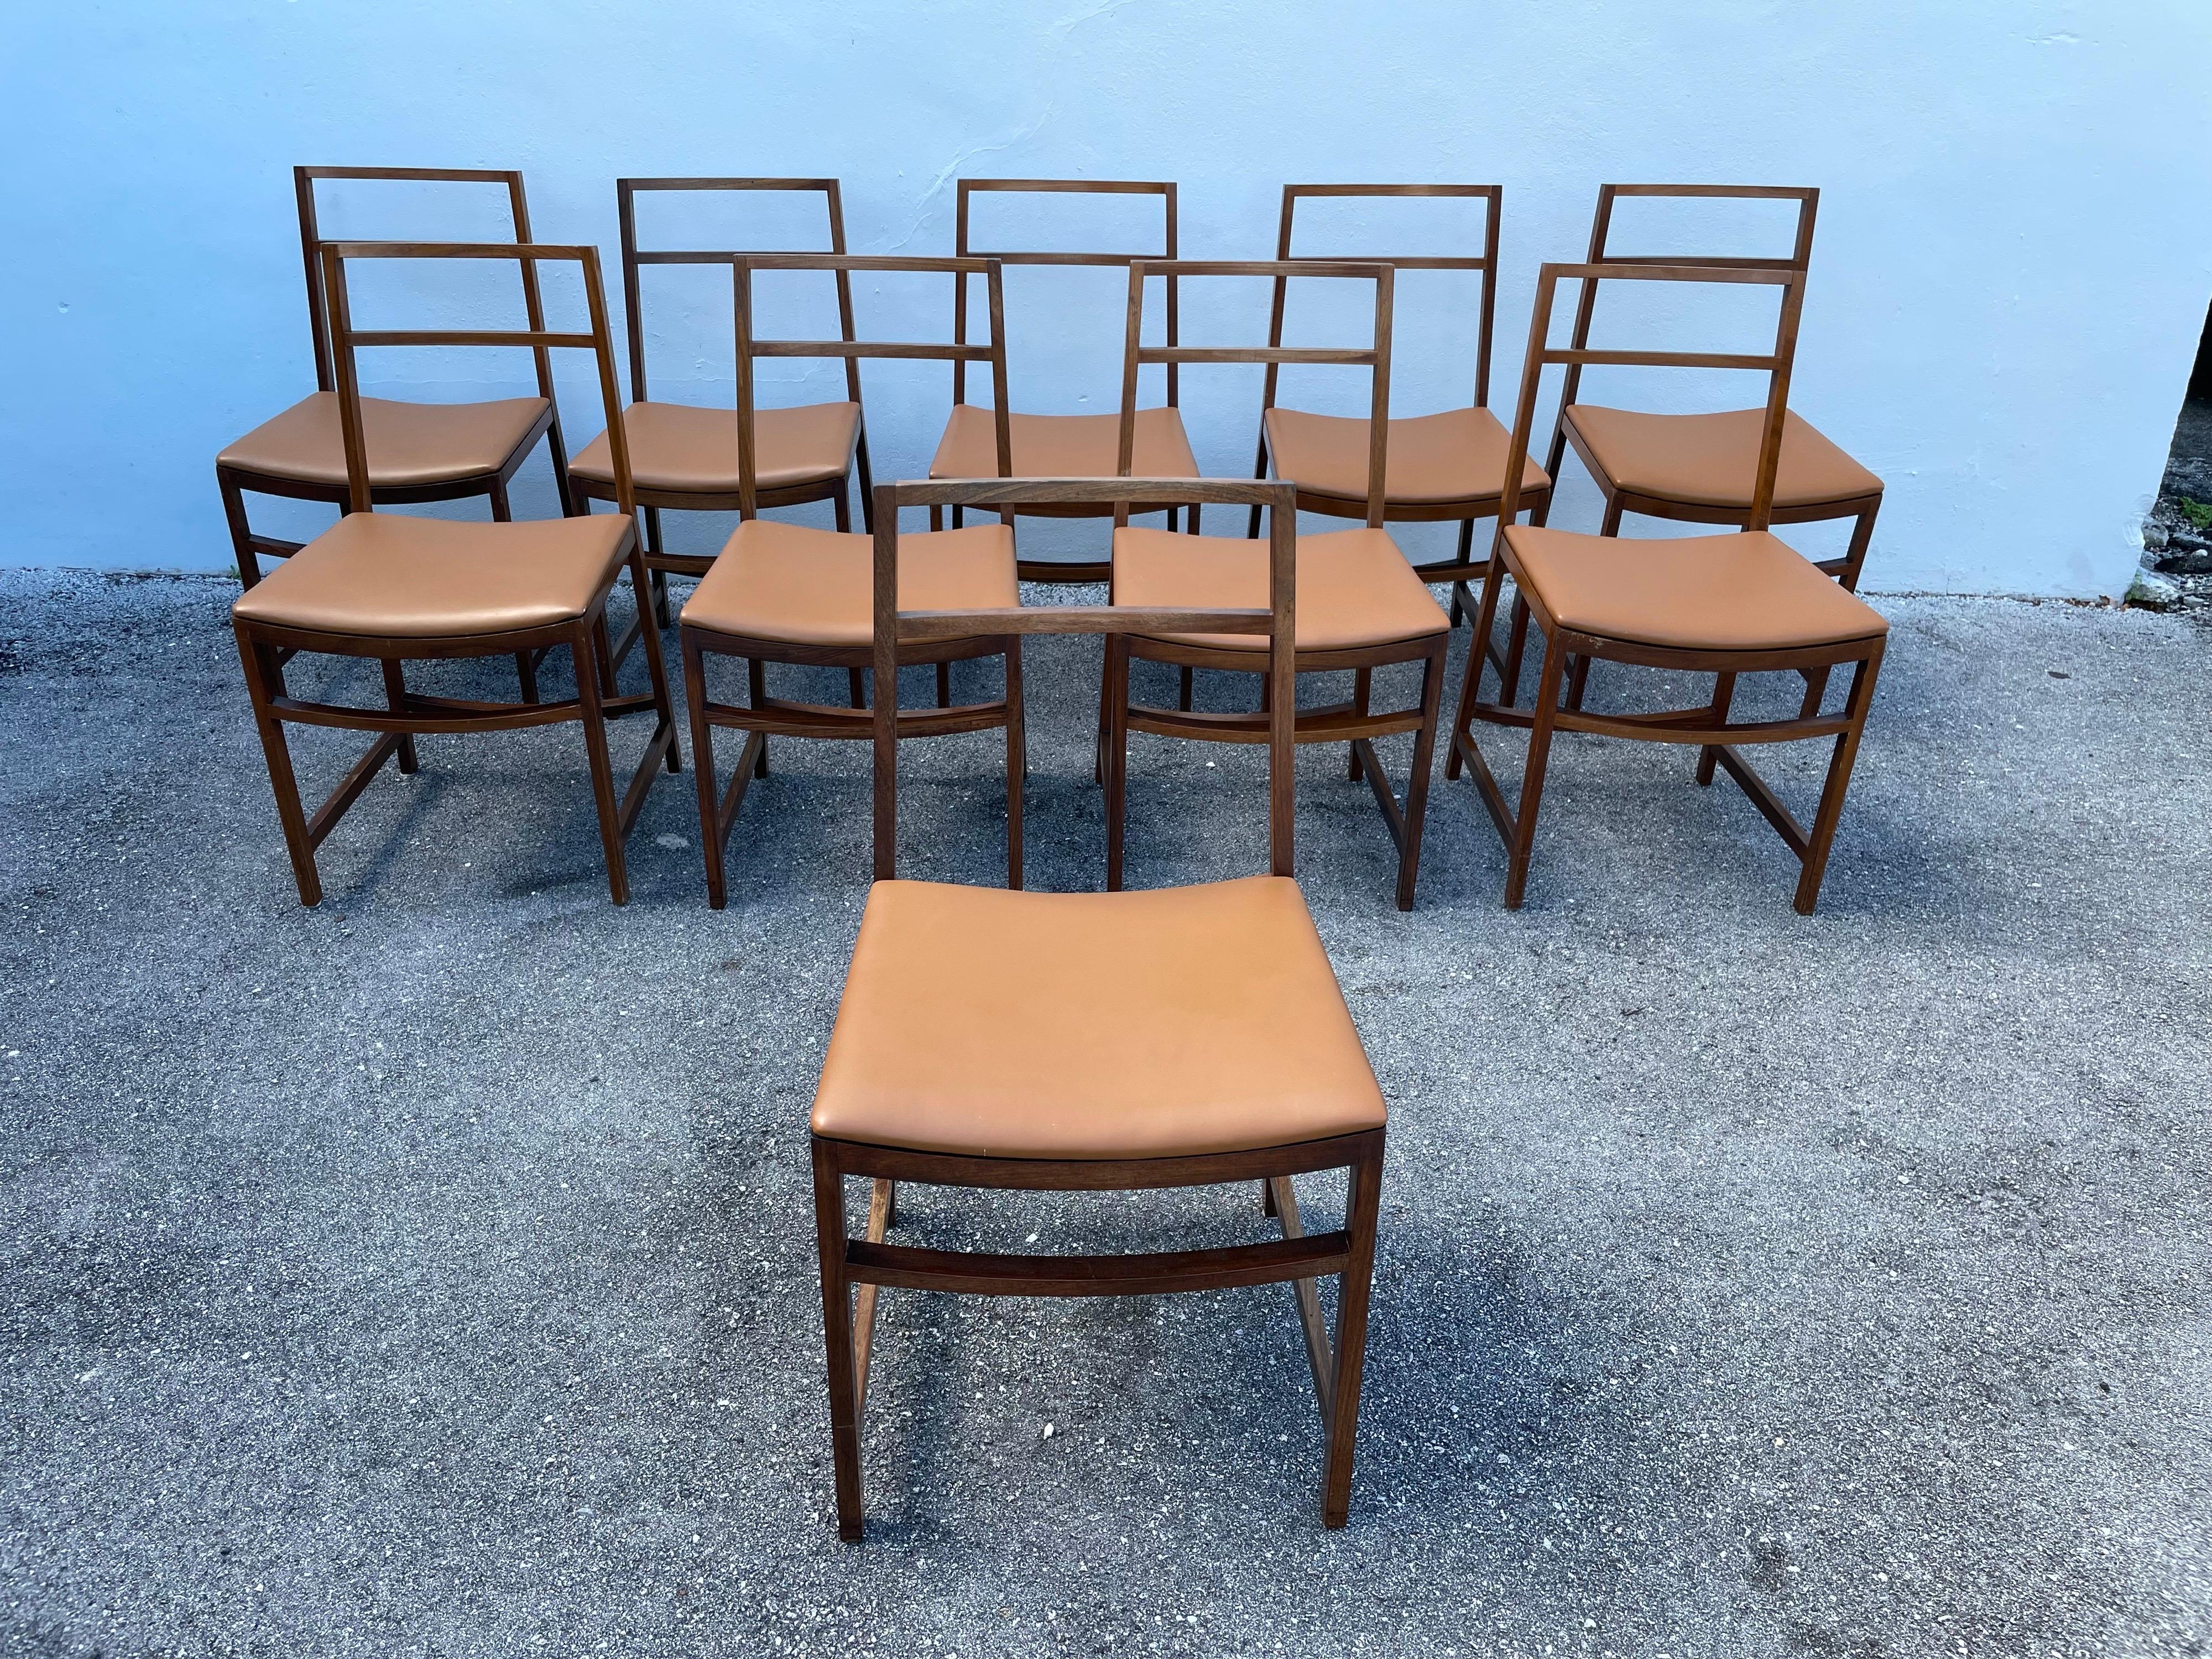 Italian Set of 10 Mid-Century Modern Dining Chairs by Renato Venturi for MIM Roma For Sale